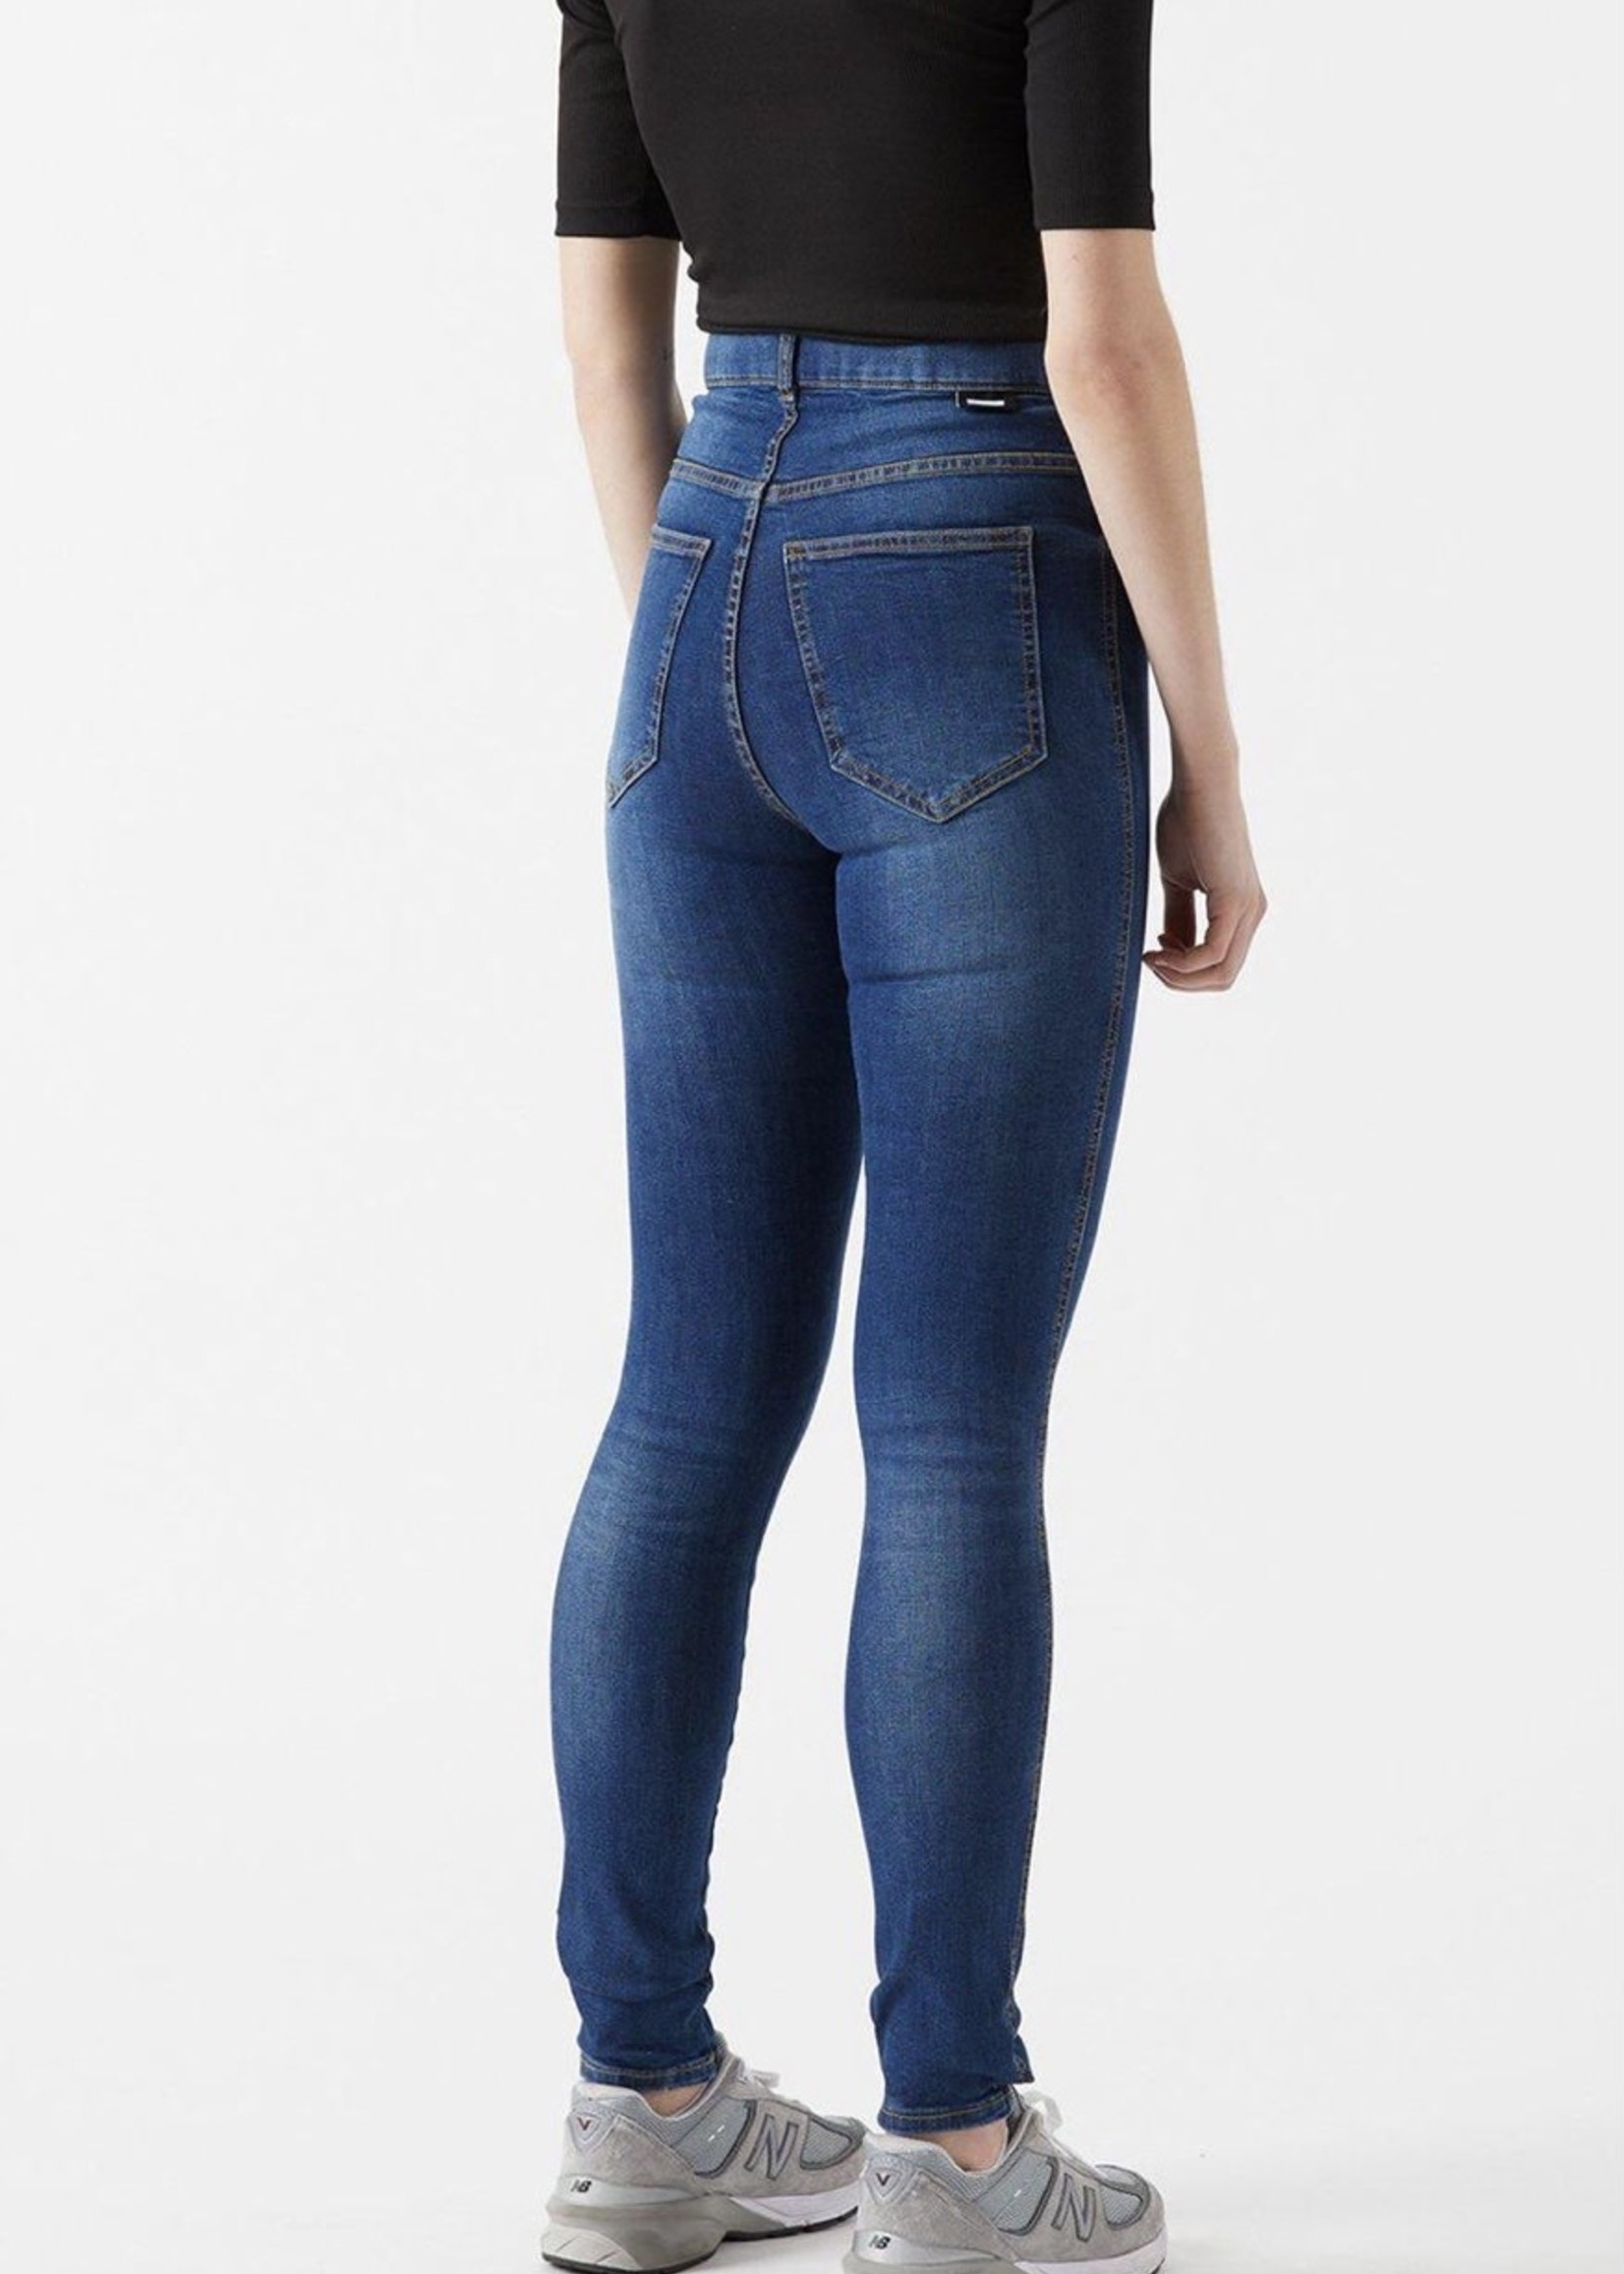 DR DENIM High Waisted Solitaire Jean